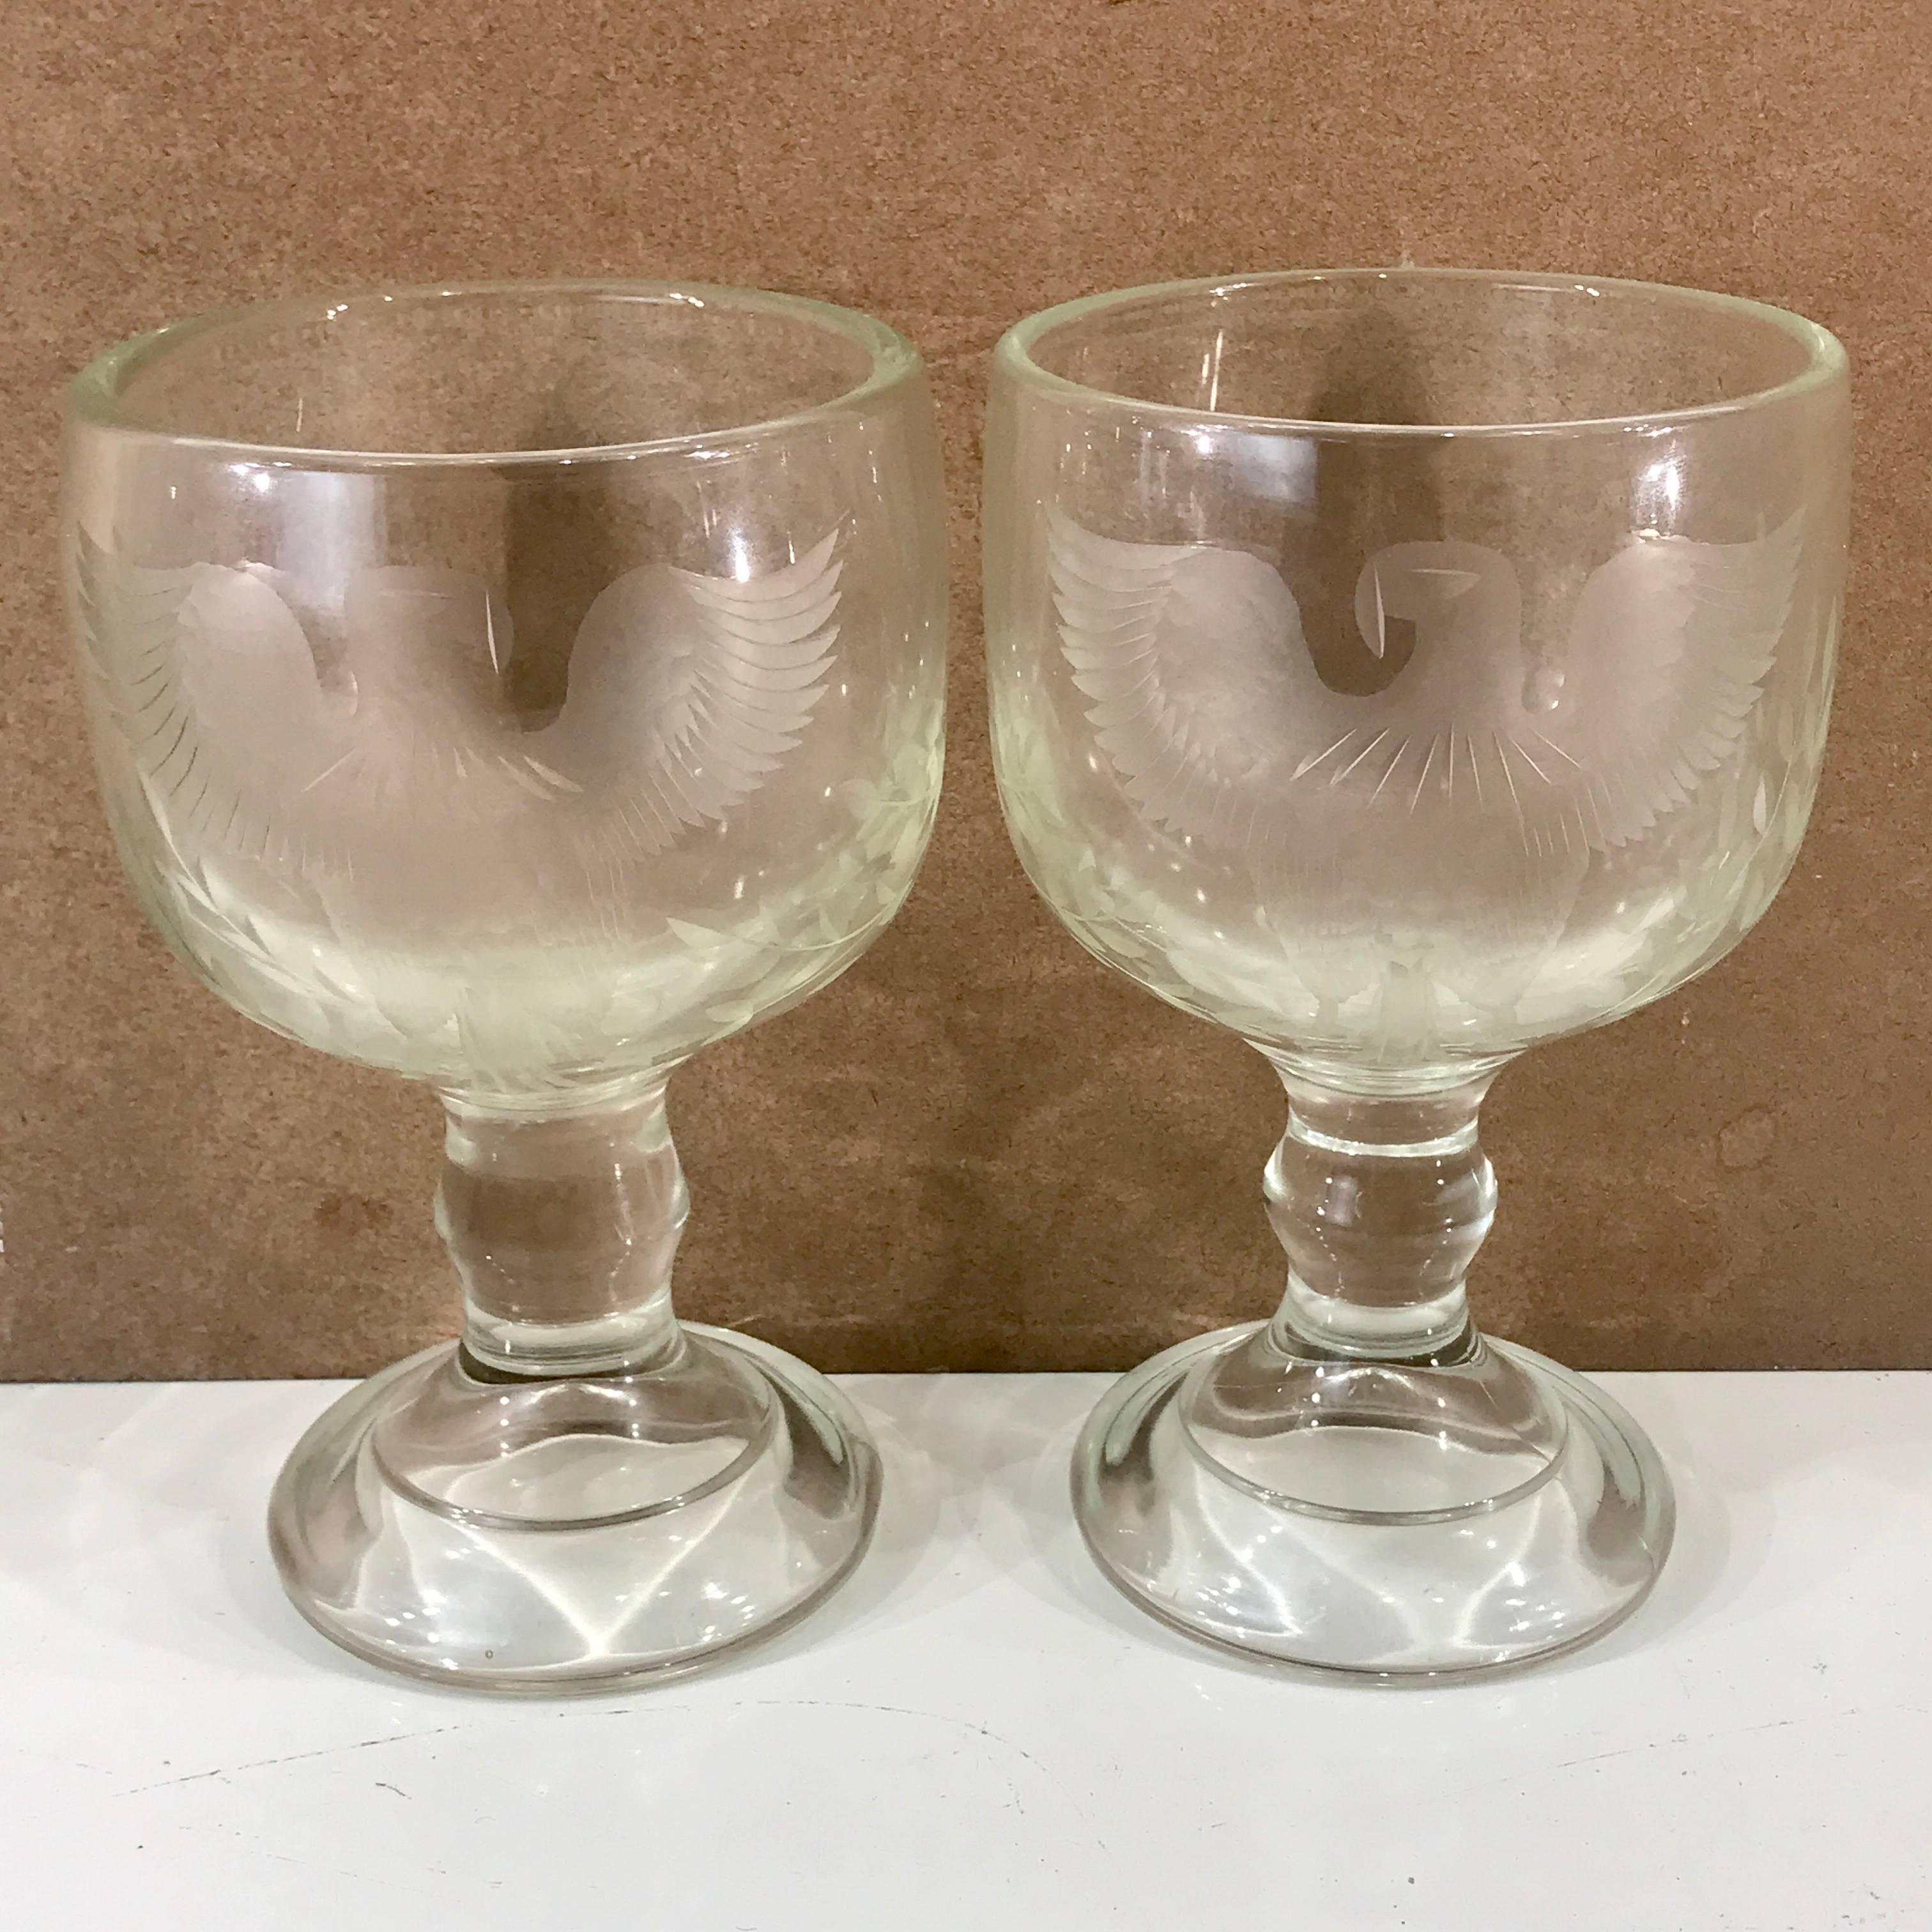 Large pair of Centennial American eagle motif engraved glass goblets, a matched pair facing left and right, both holding olive branches. Possibly representing a country of peace and not war, the civil war ended 11 years earlier. The glass is molded